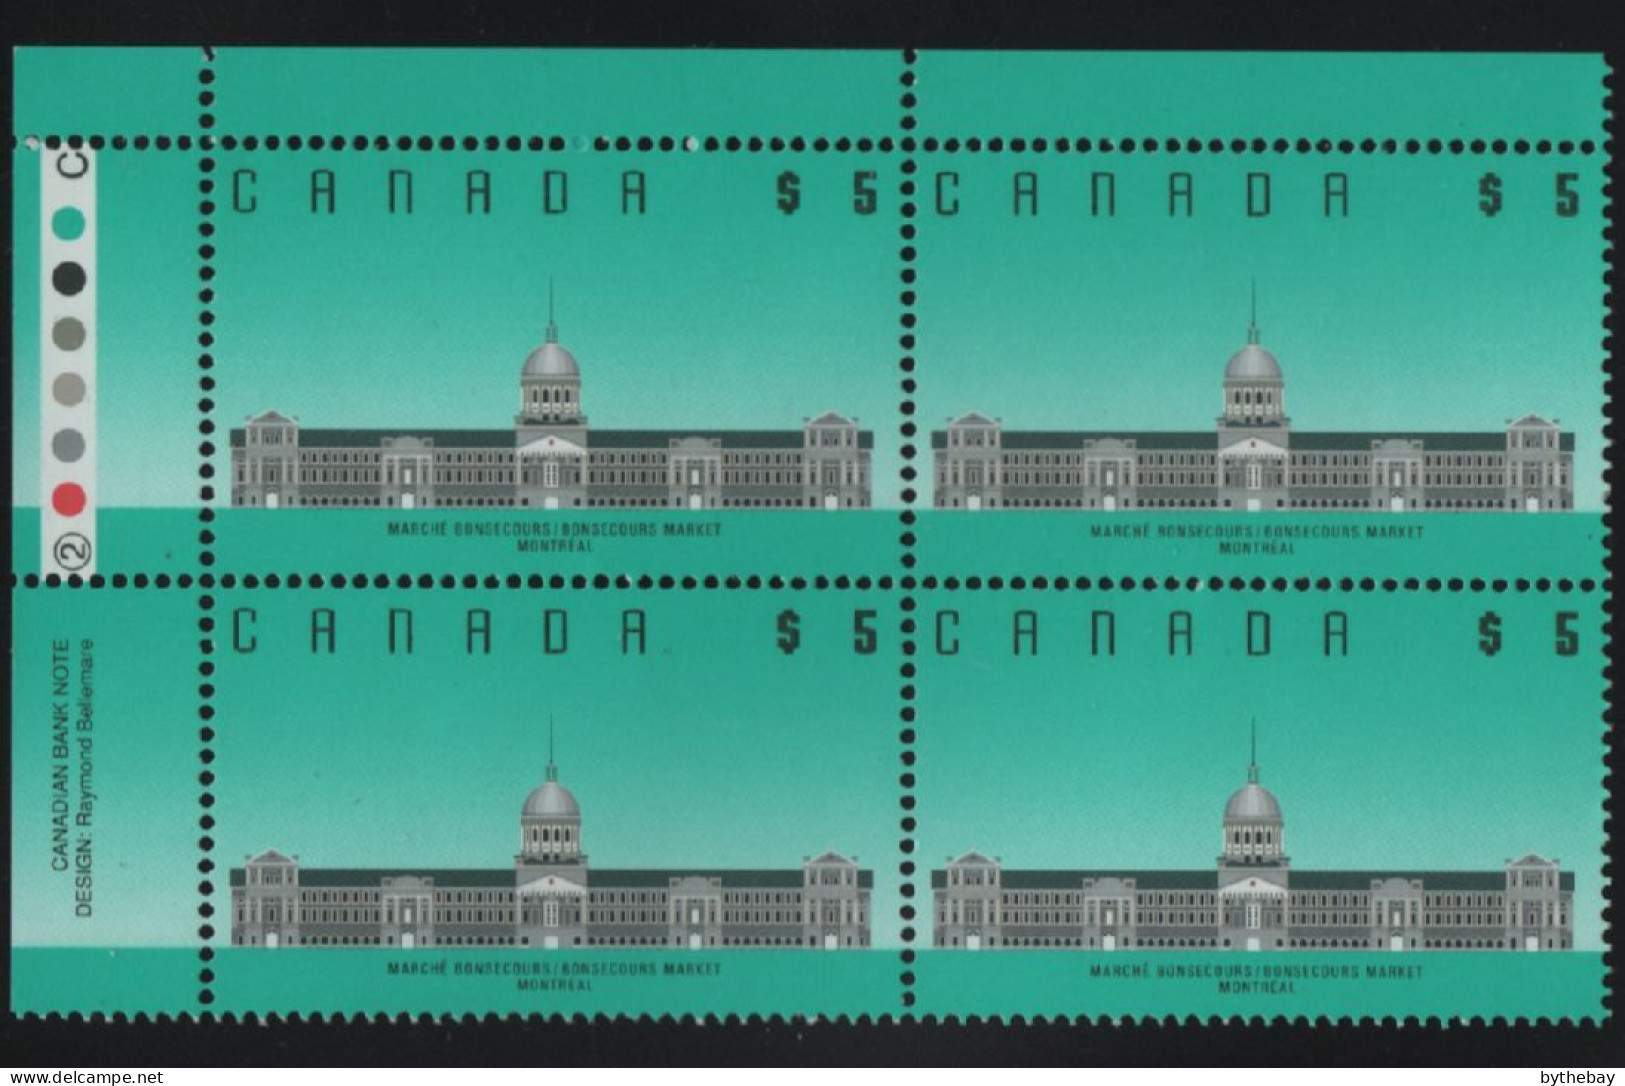 Canada 1988-92 MNH Sc 1183i $5 Bonsecours Market UL Plate Block - Num. Planches & Inscriptions Marge